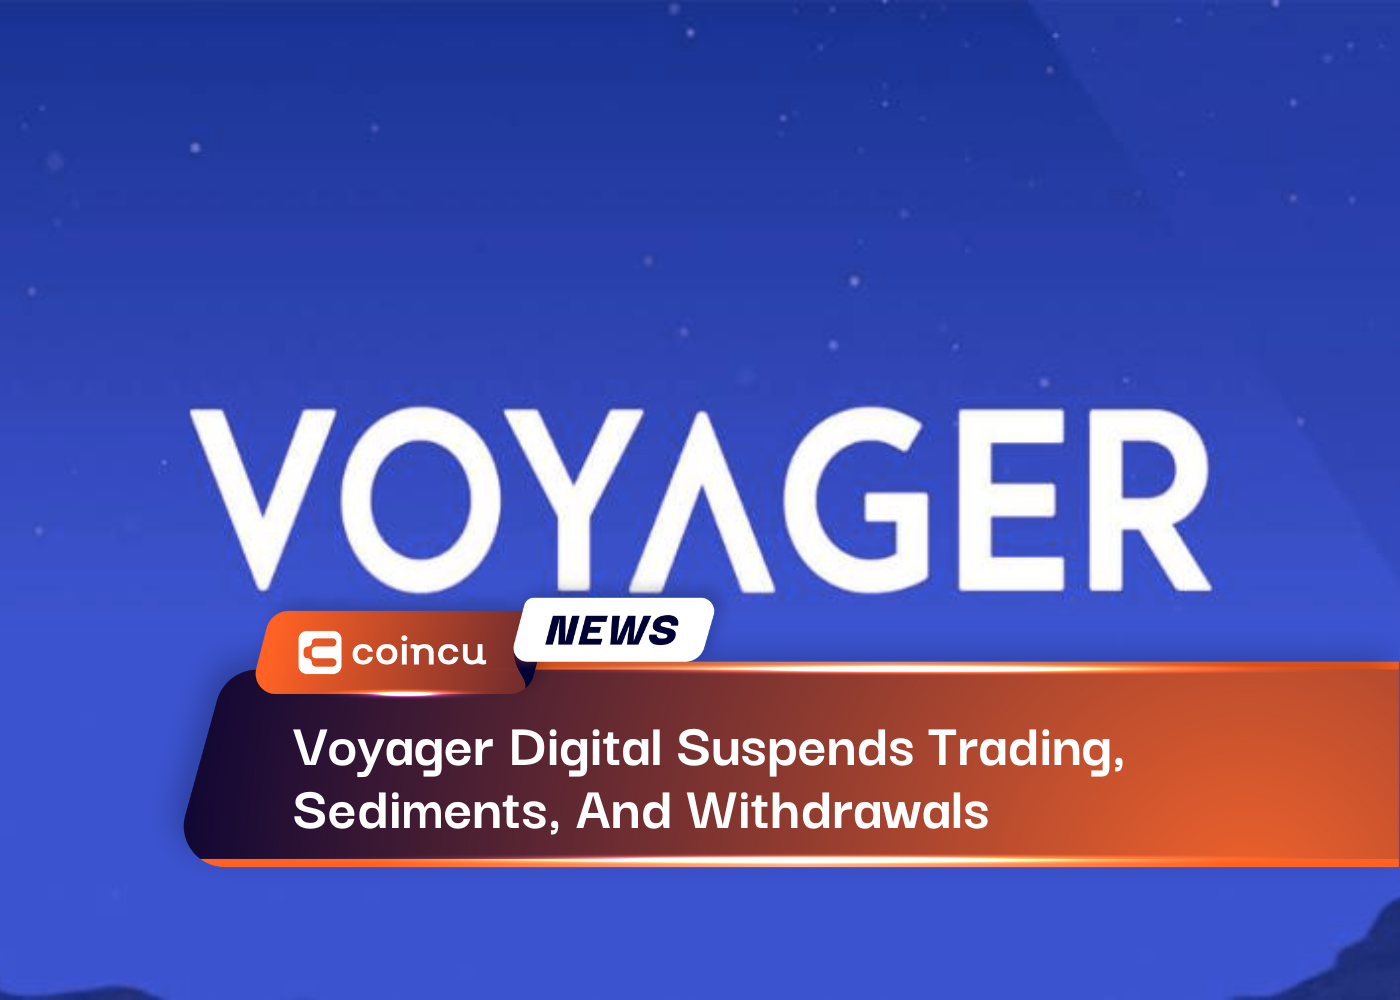 Voyager Digital Suspends Trading, Sediments, And Withdrawals